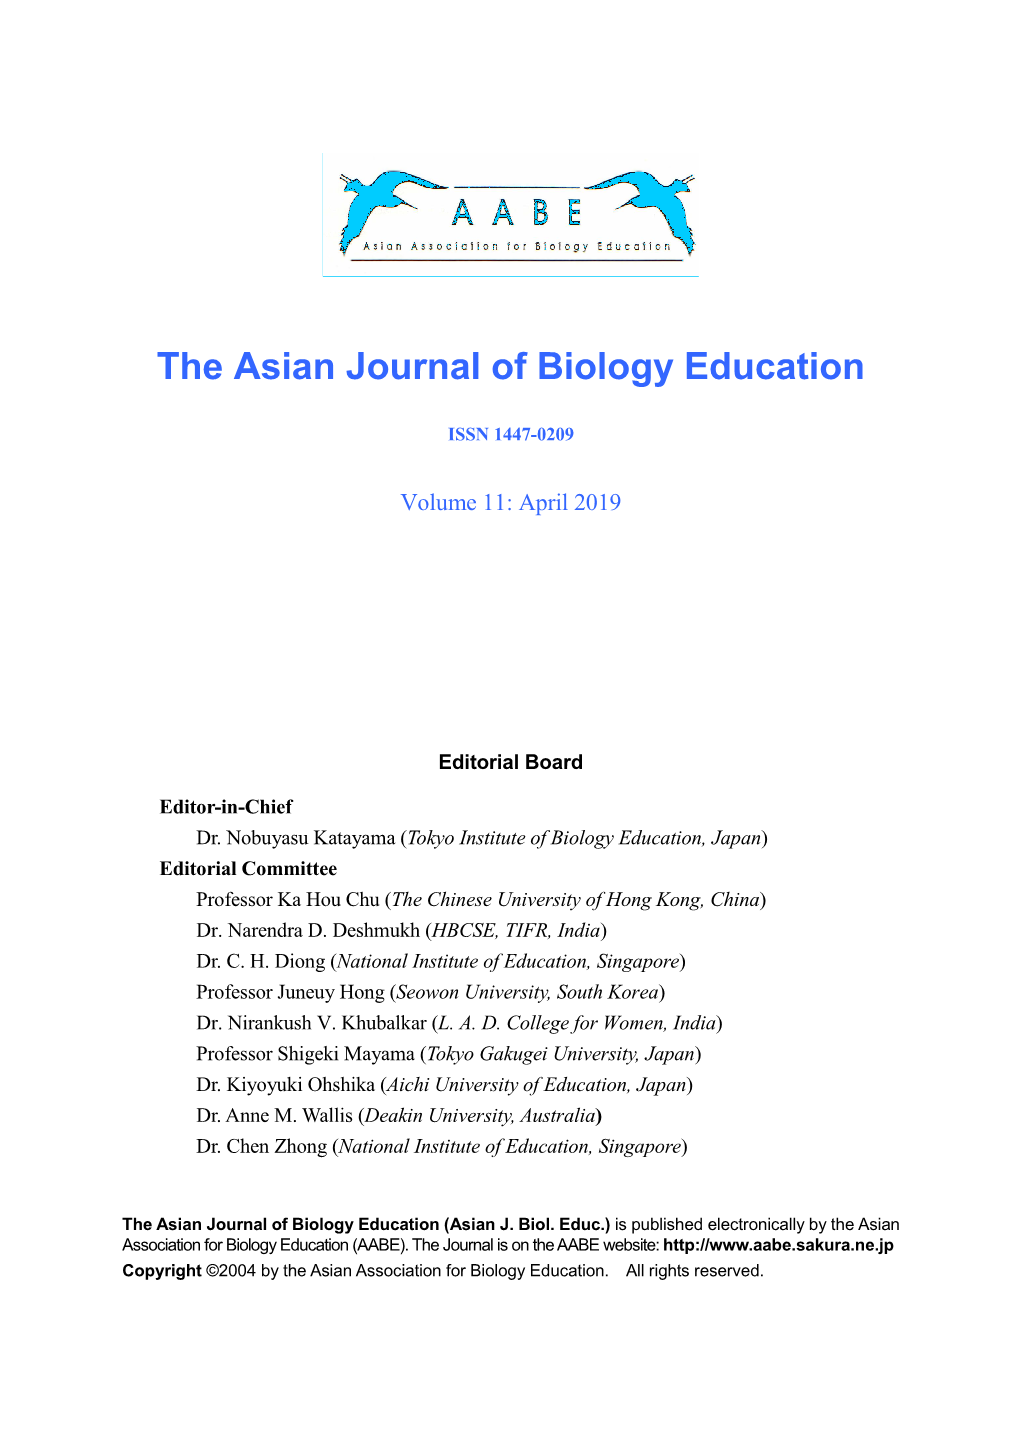 The Asian Journal of Biology Education